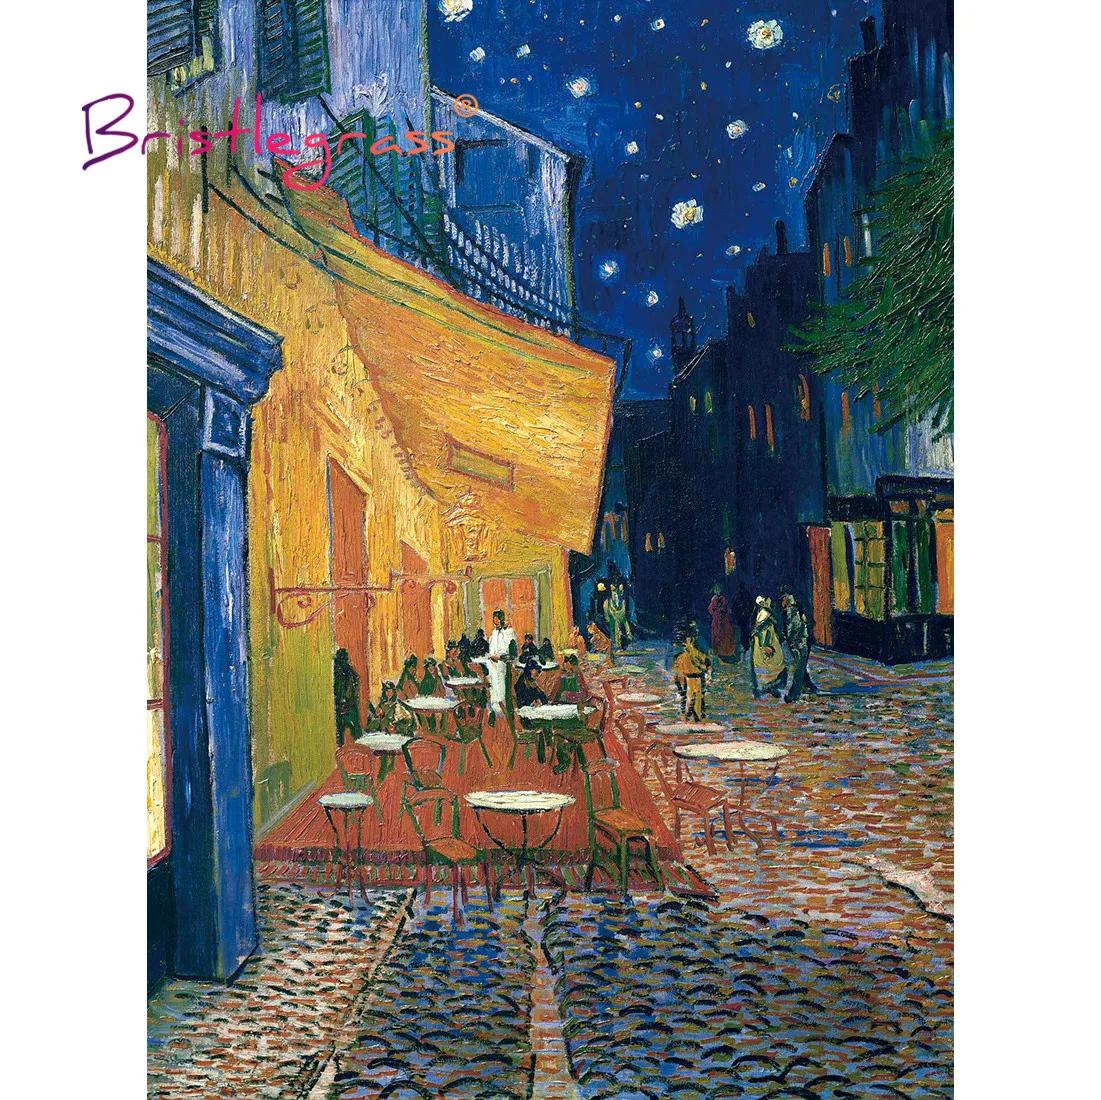 BRISTLEGRASS Wooden Jigsaw Puzzles 500 1000 Piece Cafe Terrace in Arles at Night Vincent van Gogh Educational Toy Painting Decor